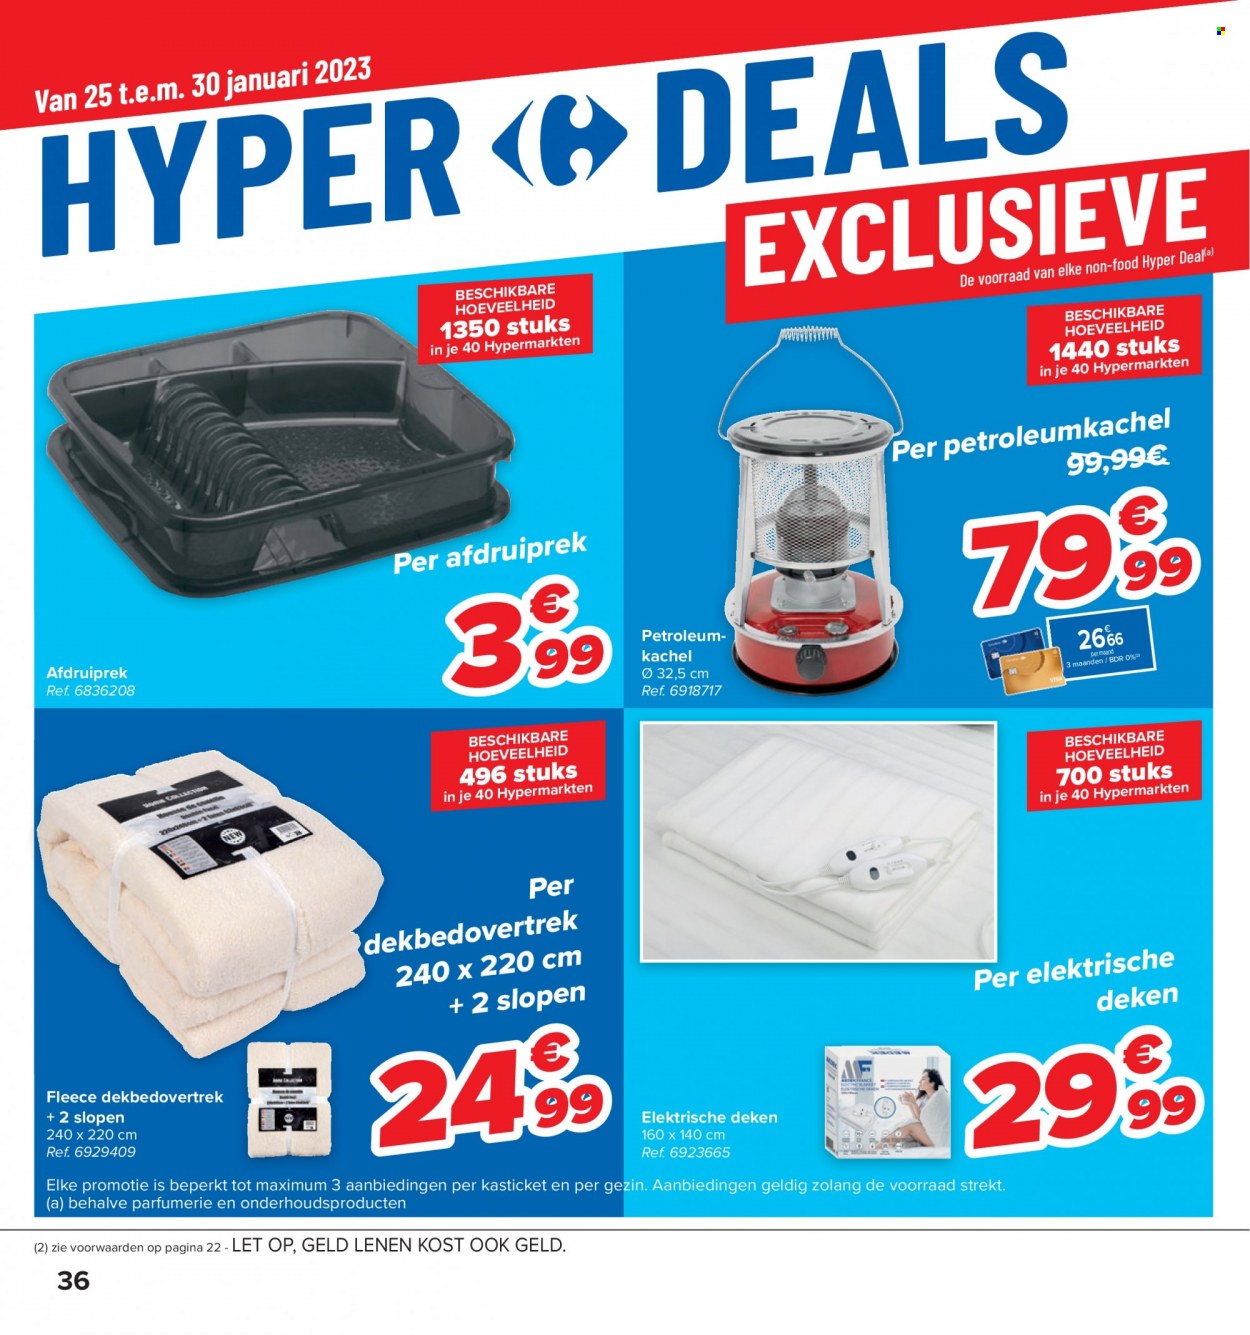 Catalogue Carrefour hypermarkt - 25.1.2023 - 6.2.2023. Page 16.